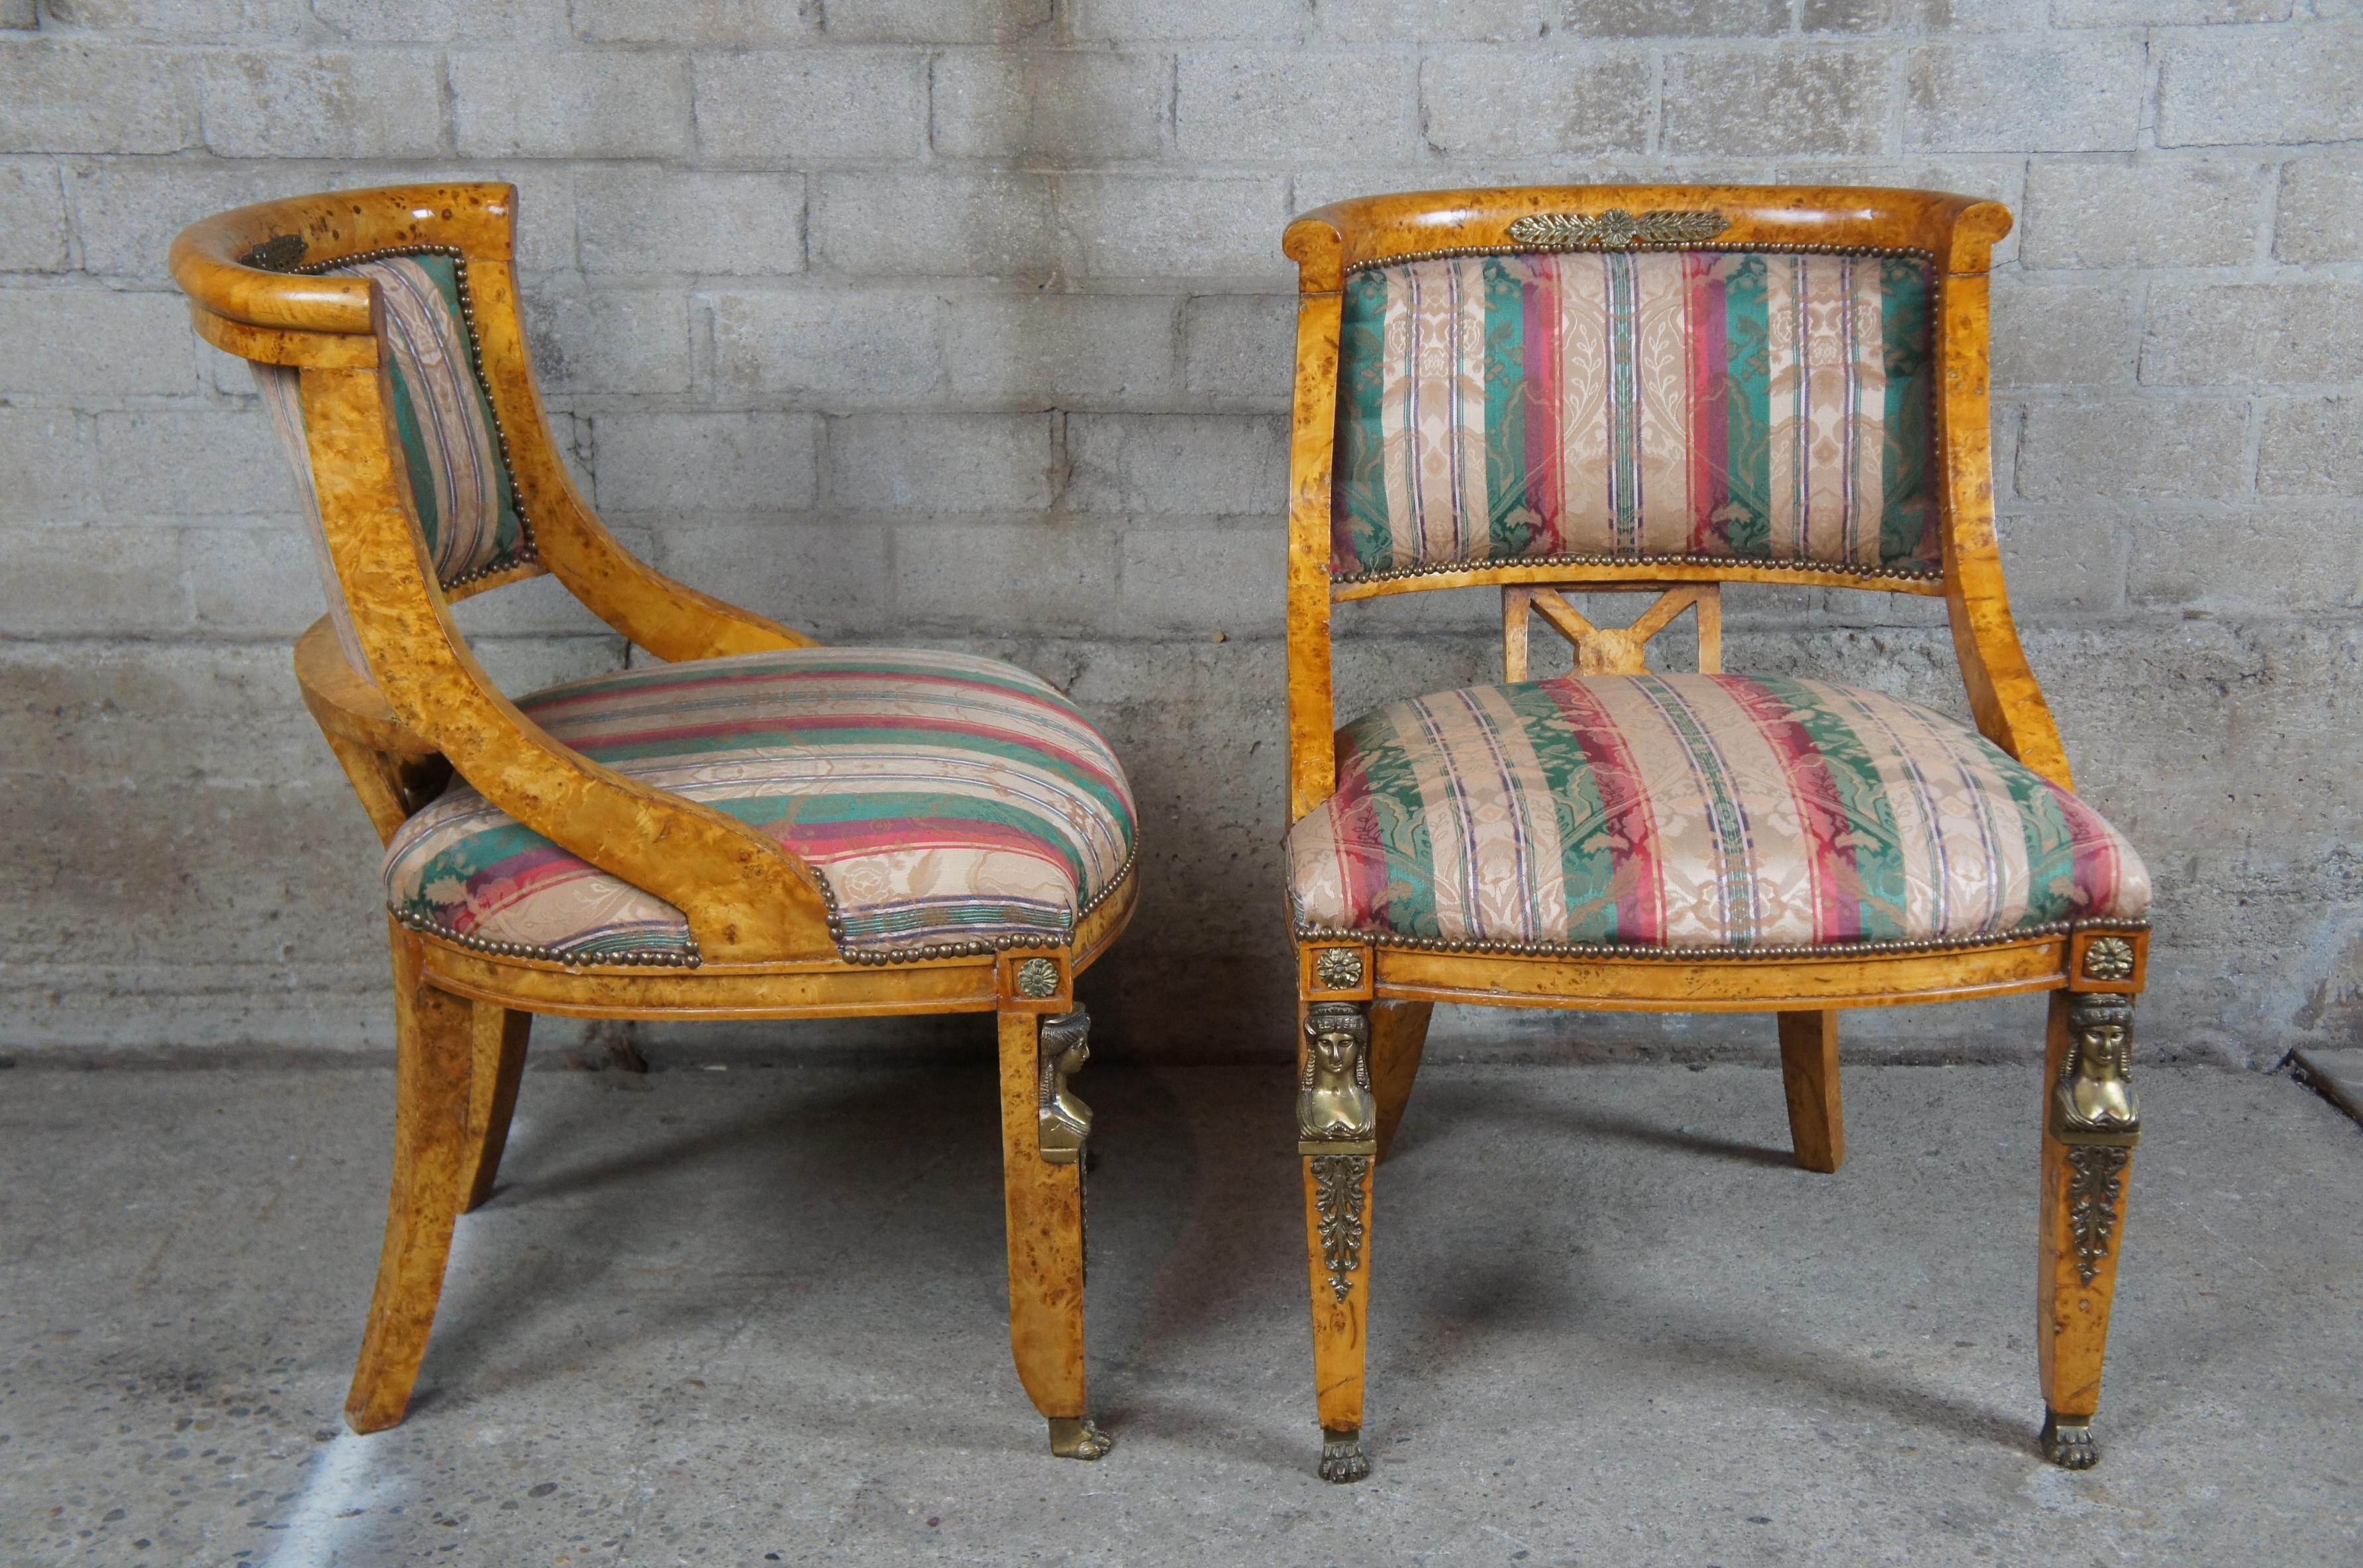 Upholstery Antique Egyptian Revival Olive Burlwood Parlor Library Side Chairs Neoclassical